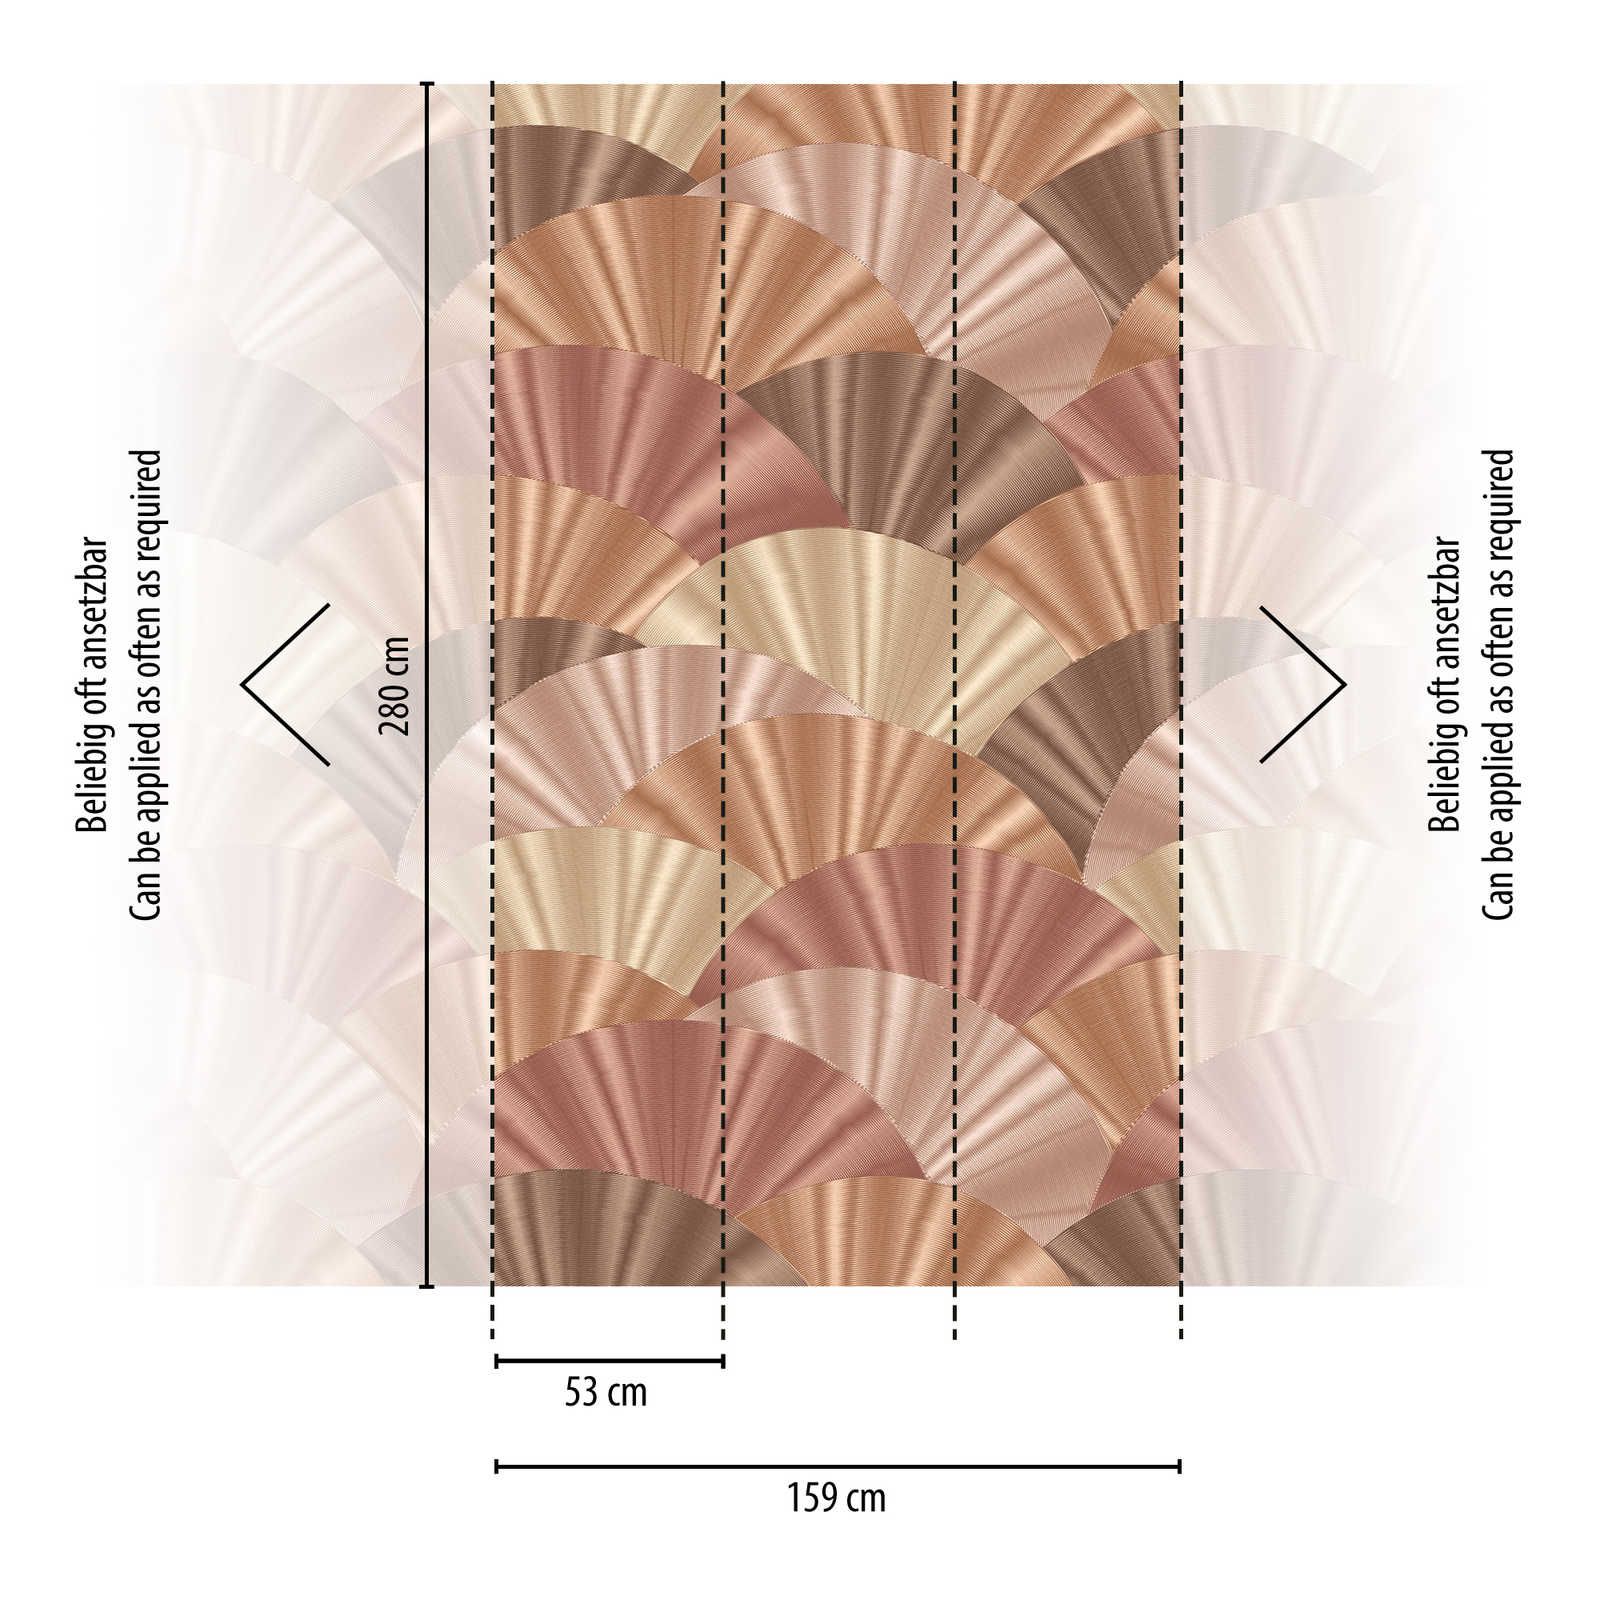             Non-woven wallpaper with fan pattern in soft shades - pink, cream, beige
        